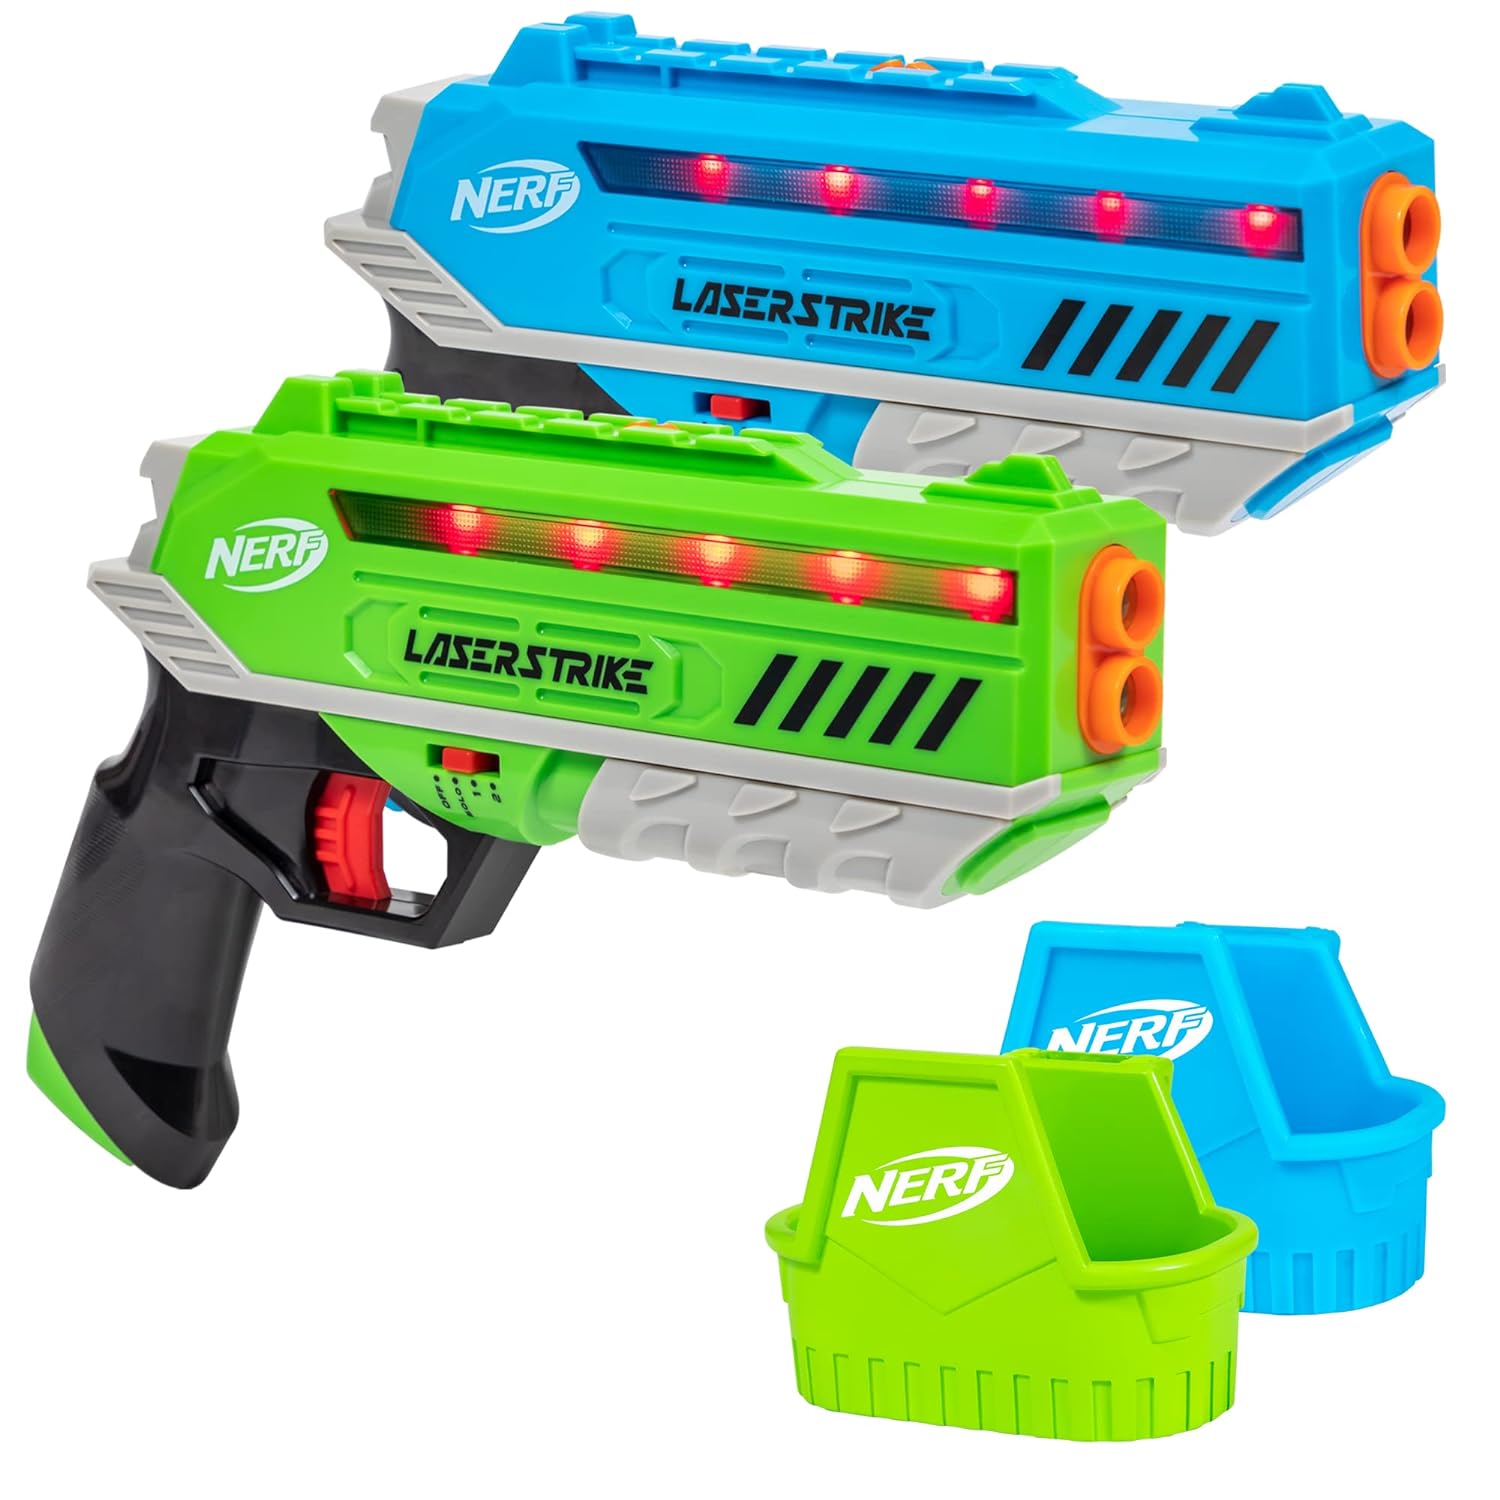 NERF Laser Strike 2 Player Laser Tag Game Pack Complete with 2 300ft Range Blasters & 2 Holsters - Indoor or Outdoor Play Arcade Games, Toys for Kids & Family